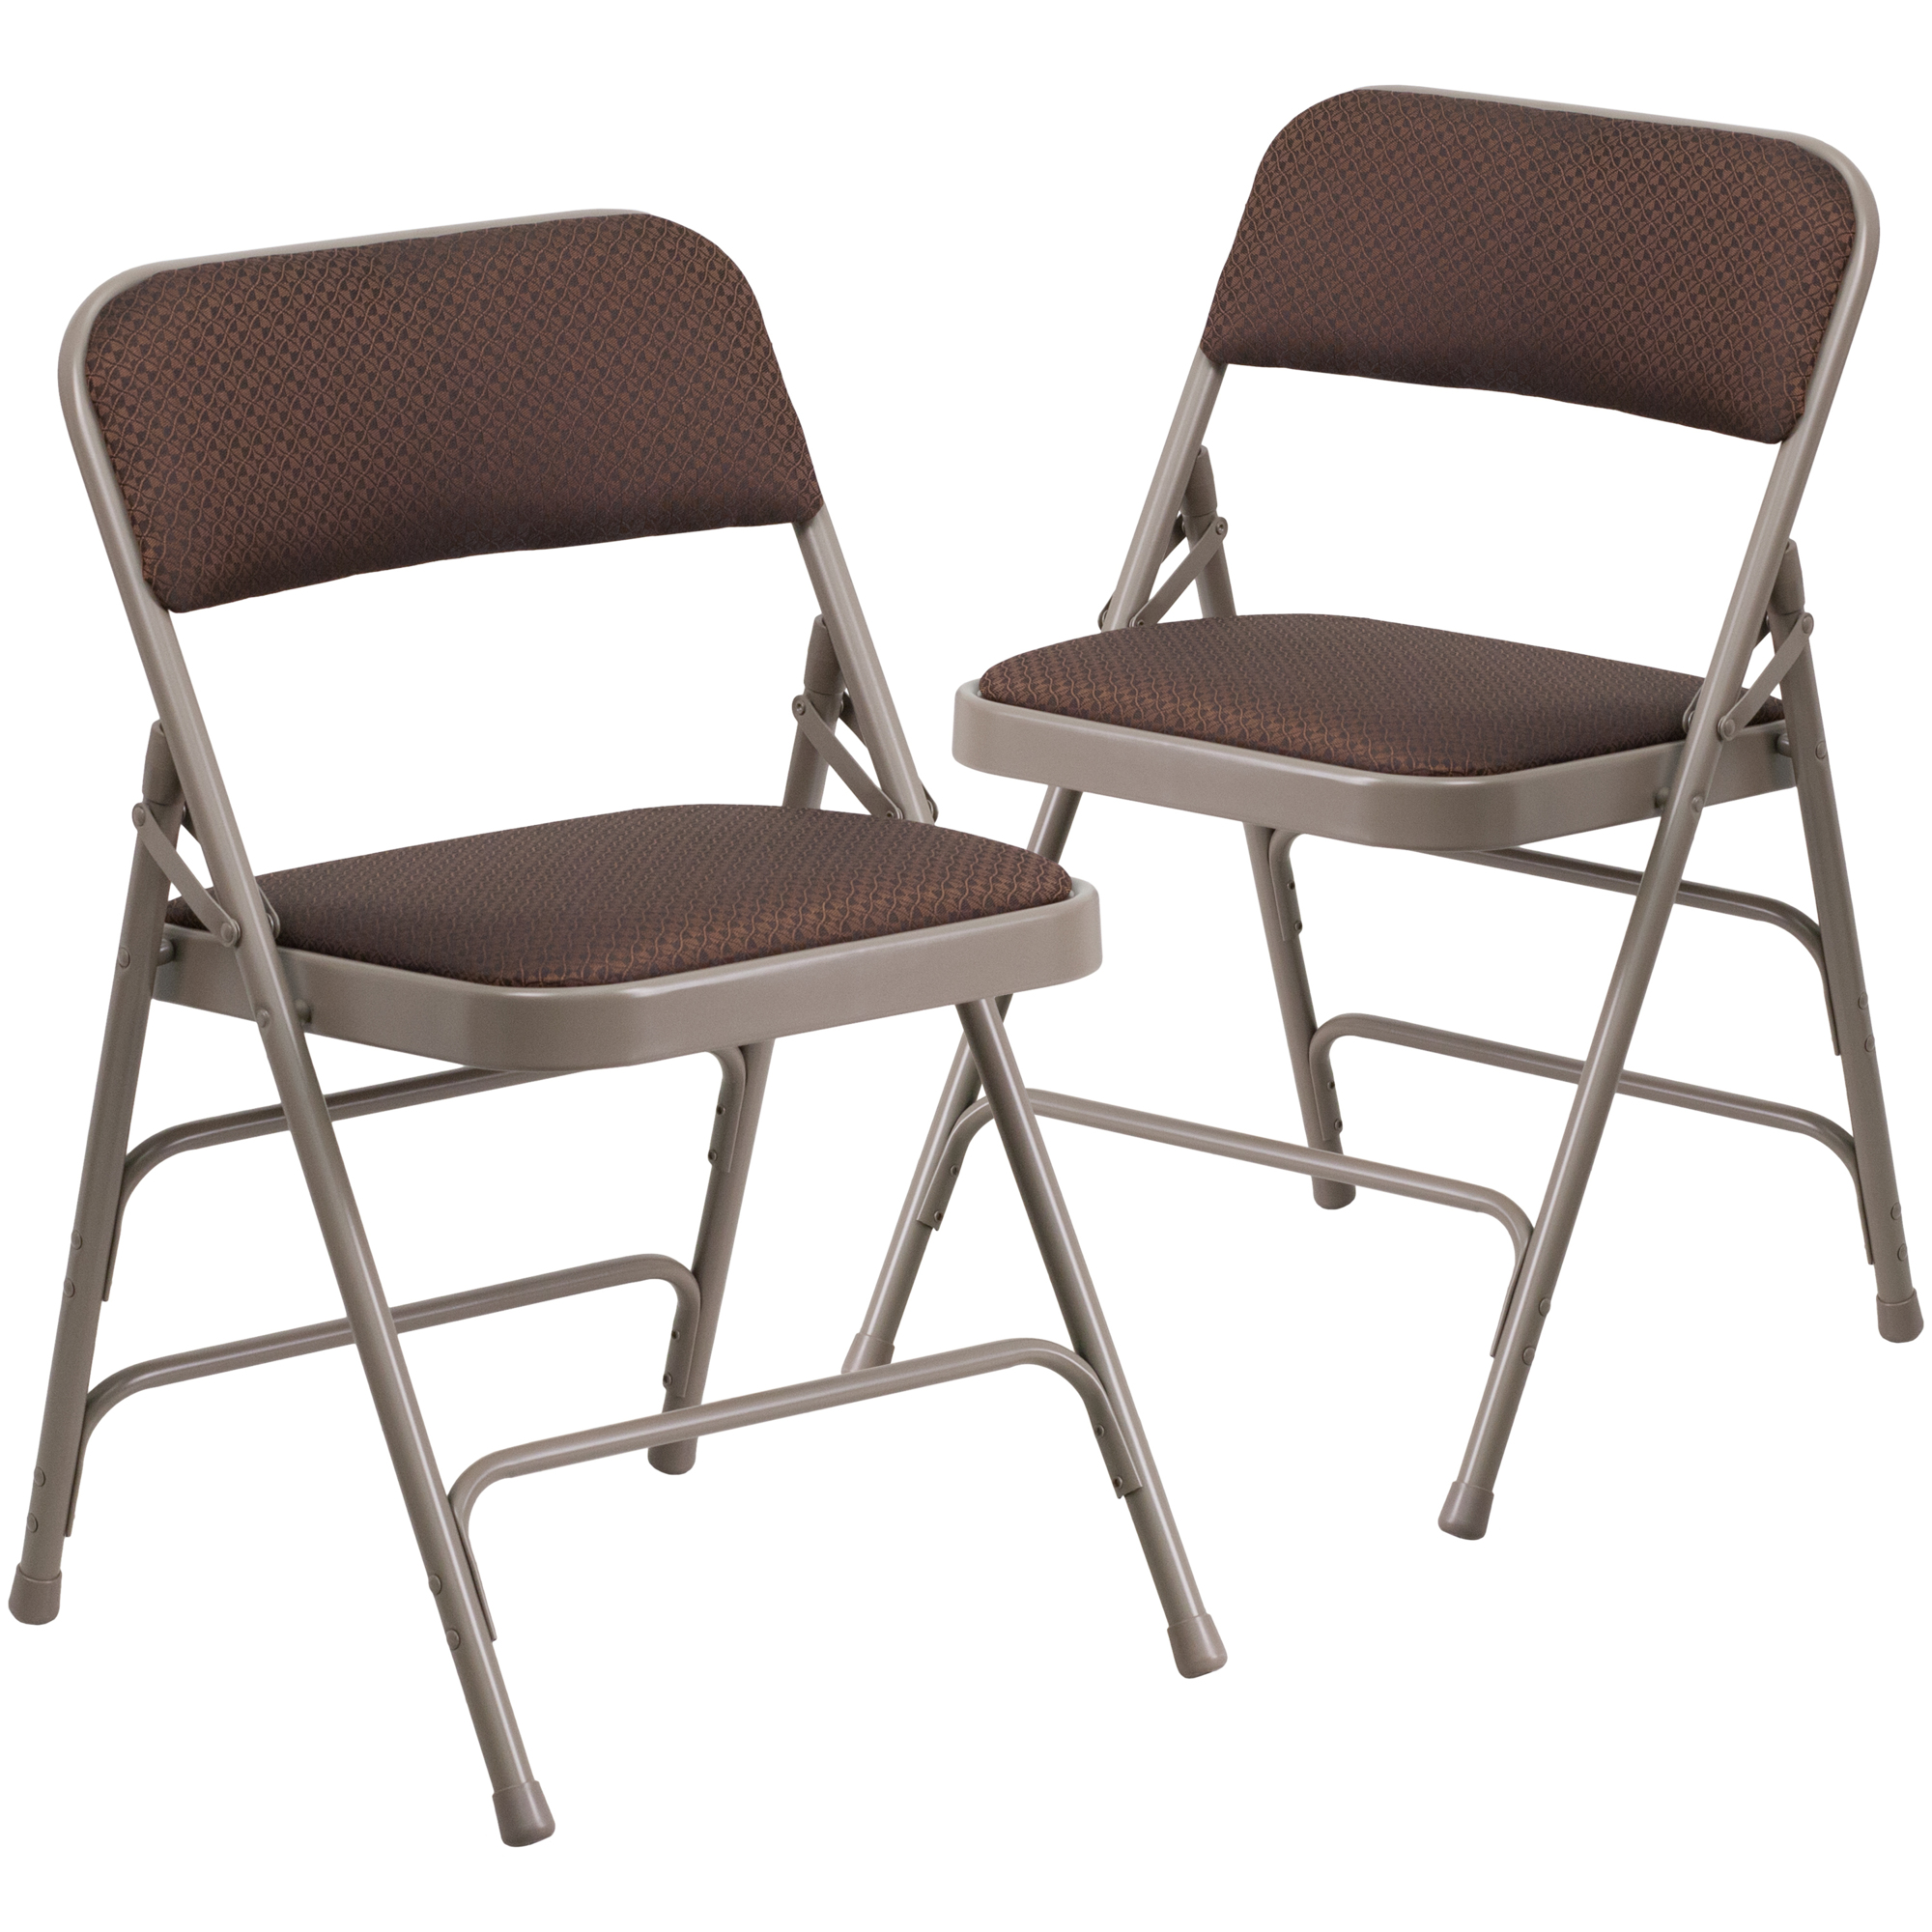 Flash Furniture, 2PK Curved Triple Braced Brown Fabric Metal Chair, Primary Color Brown, Included (qty.) 2, Model 2AWMC309AFBRN